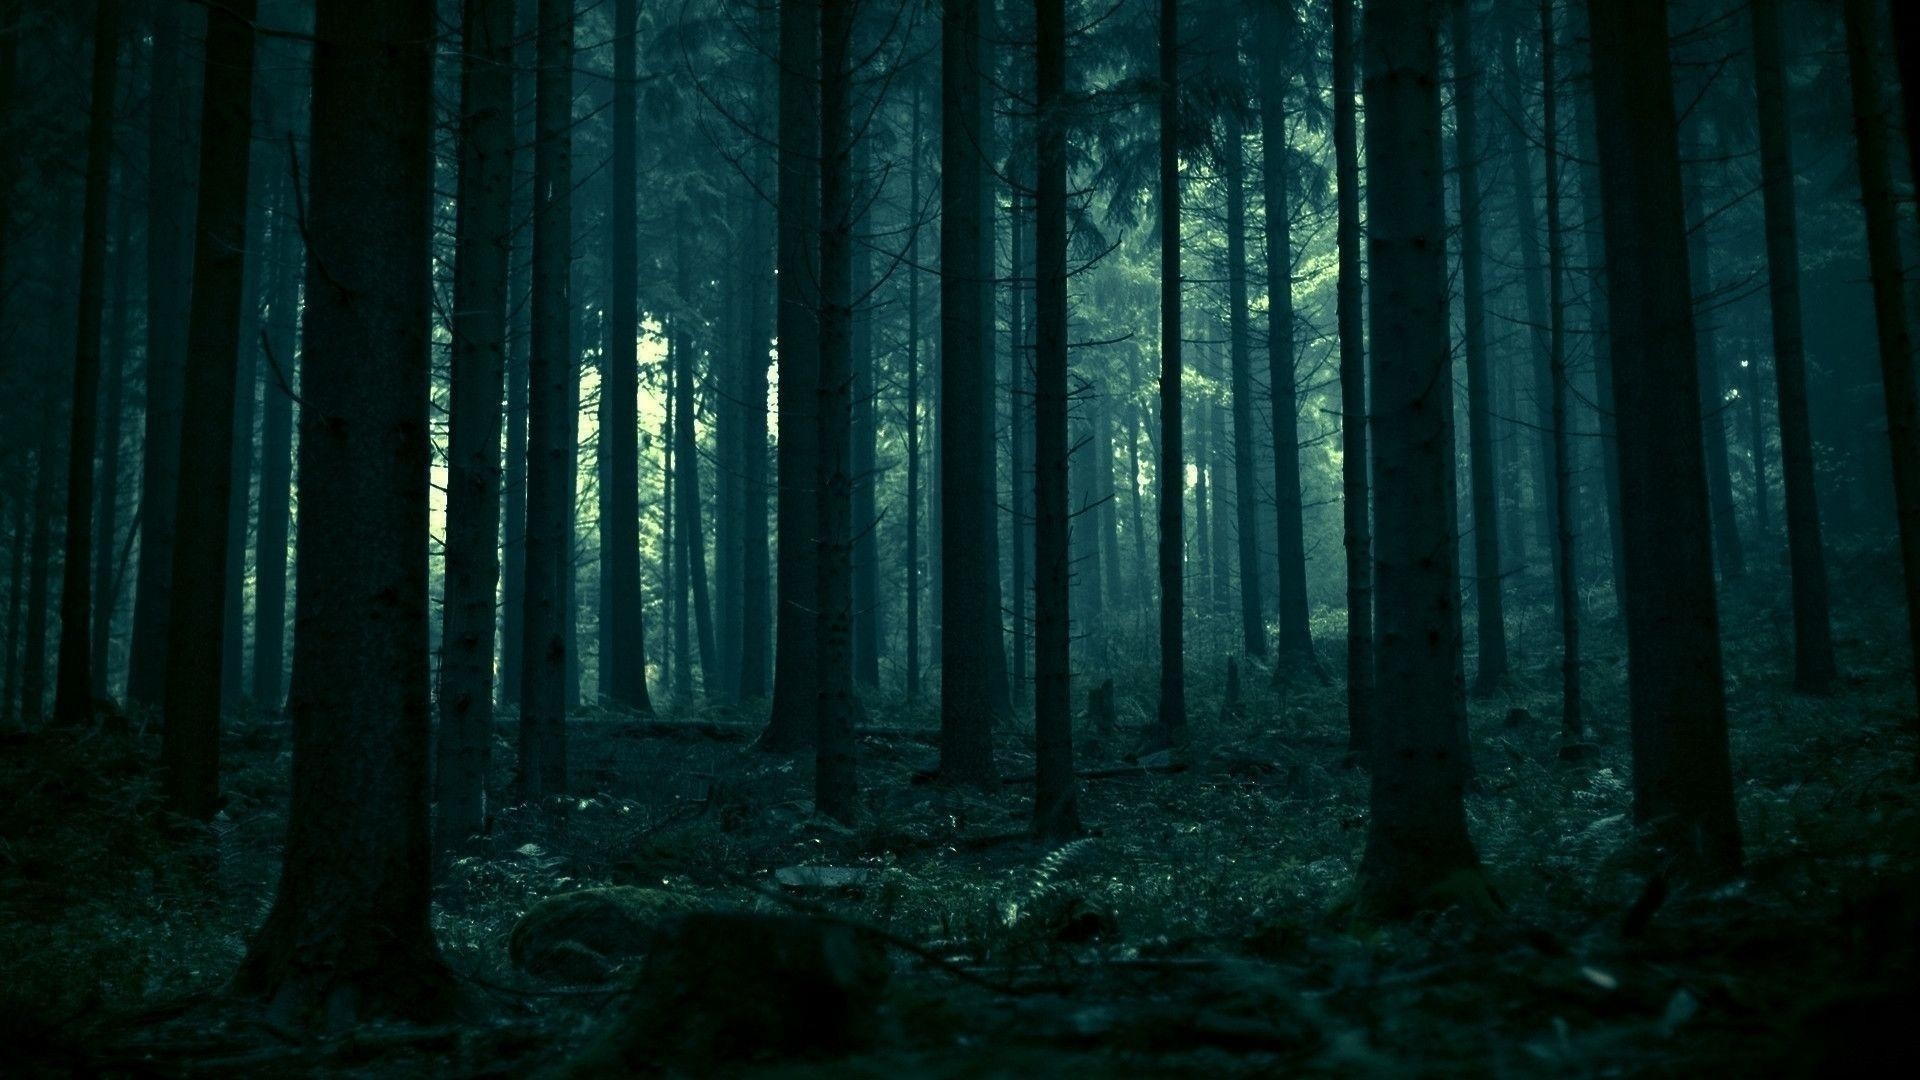 1920x1080 Title : dark forest wallpapers – wallpaper cave. Dimension : 1920 x 1080.  File Type : JPG/JPEG